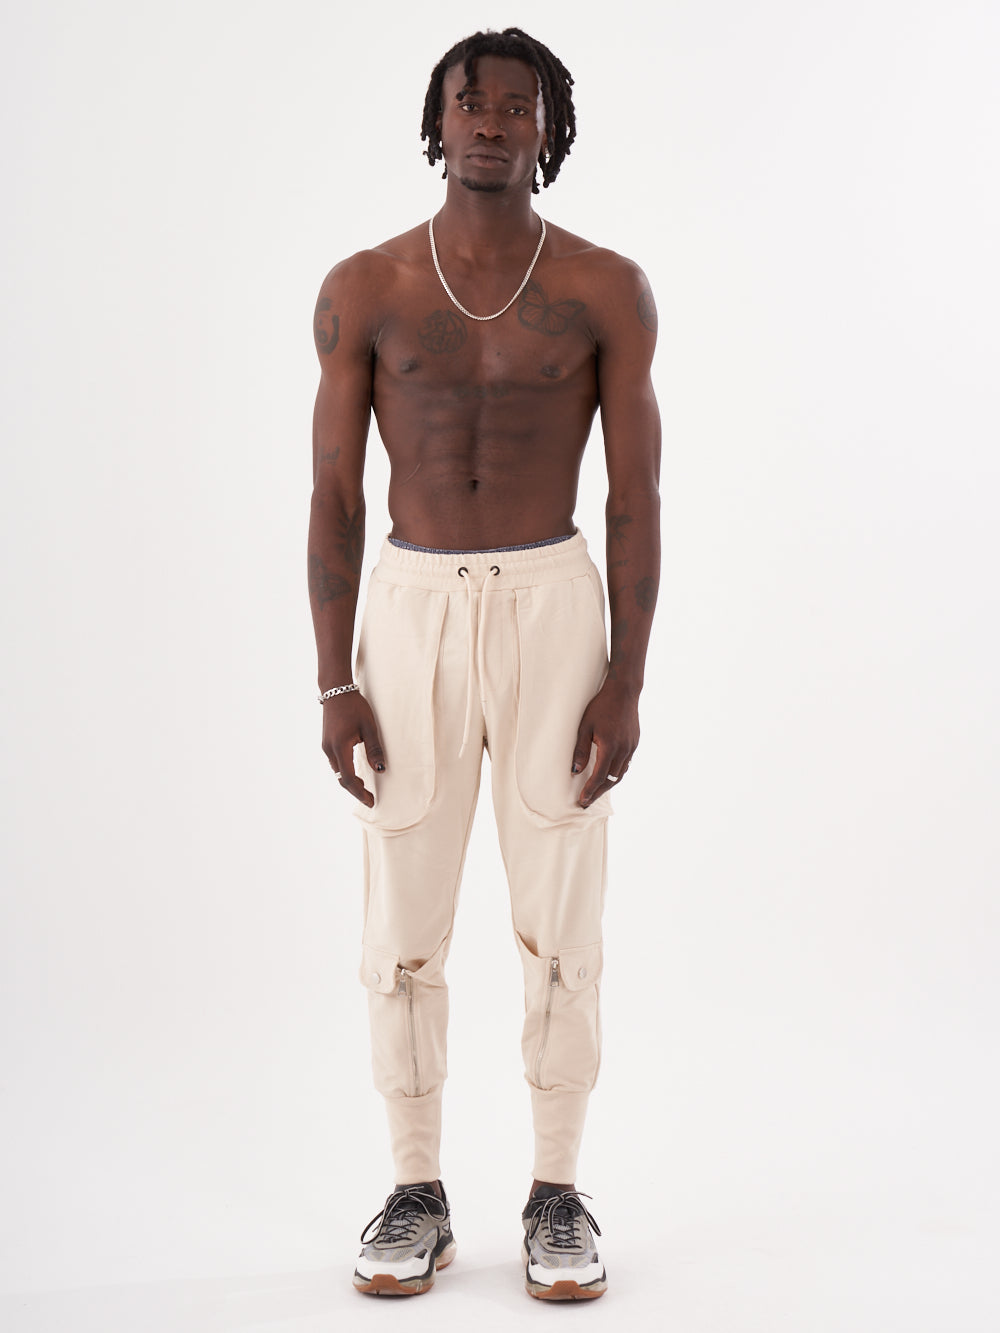 A stylish man with no shirt and no pants is standing in front of a white background wearing comfortable GUERRILLA | BEIGE joggers.